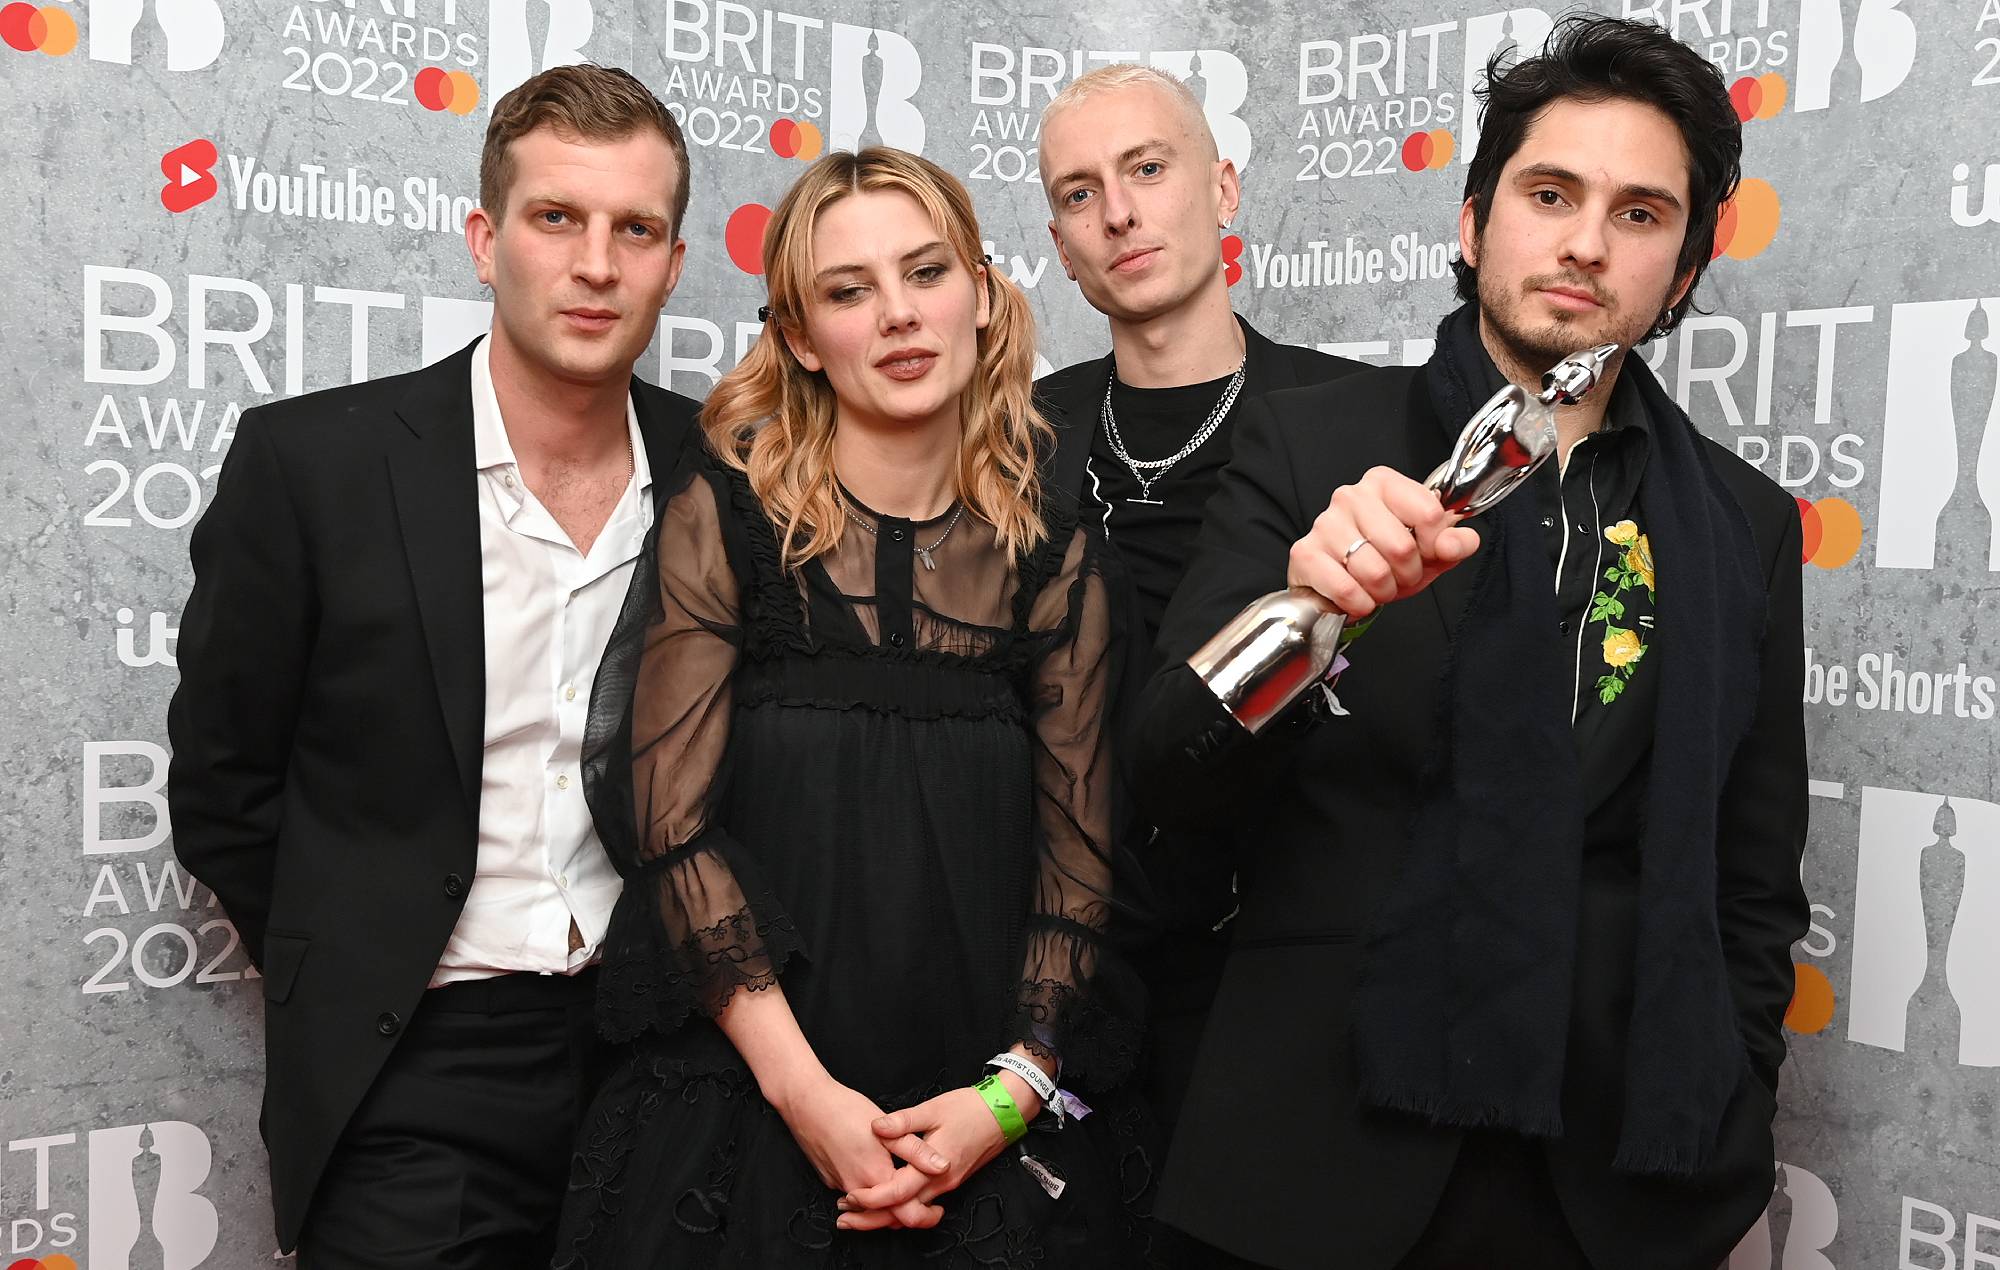 Wolf Alice’s “dream come true” was to have a night out with Sam Fender and Tom Grennan